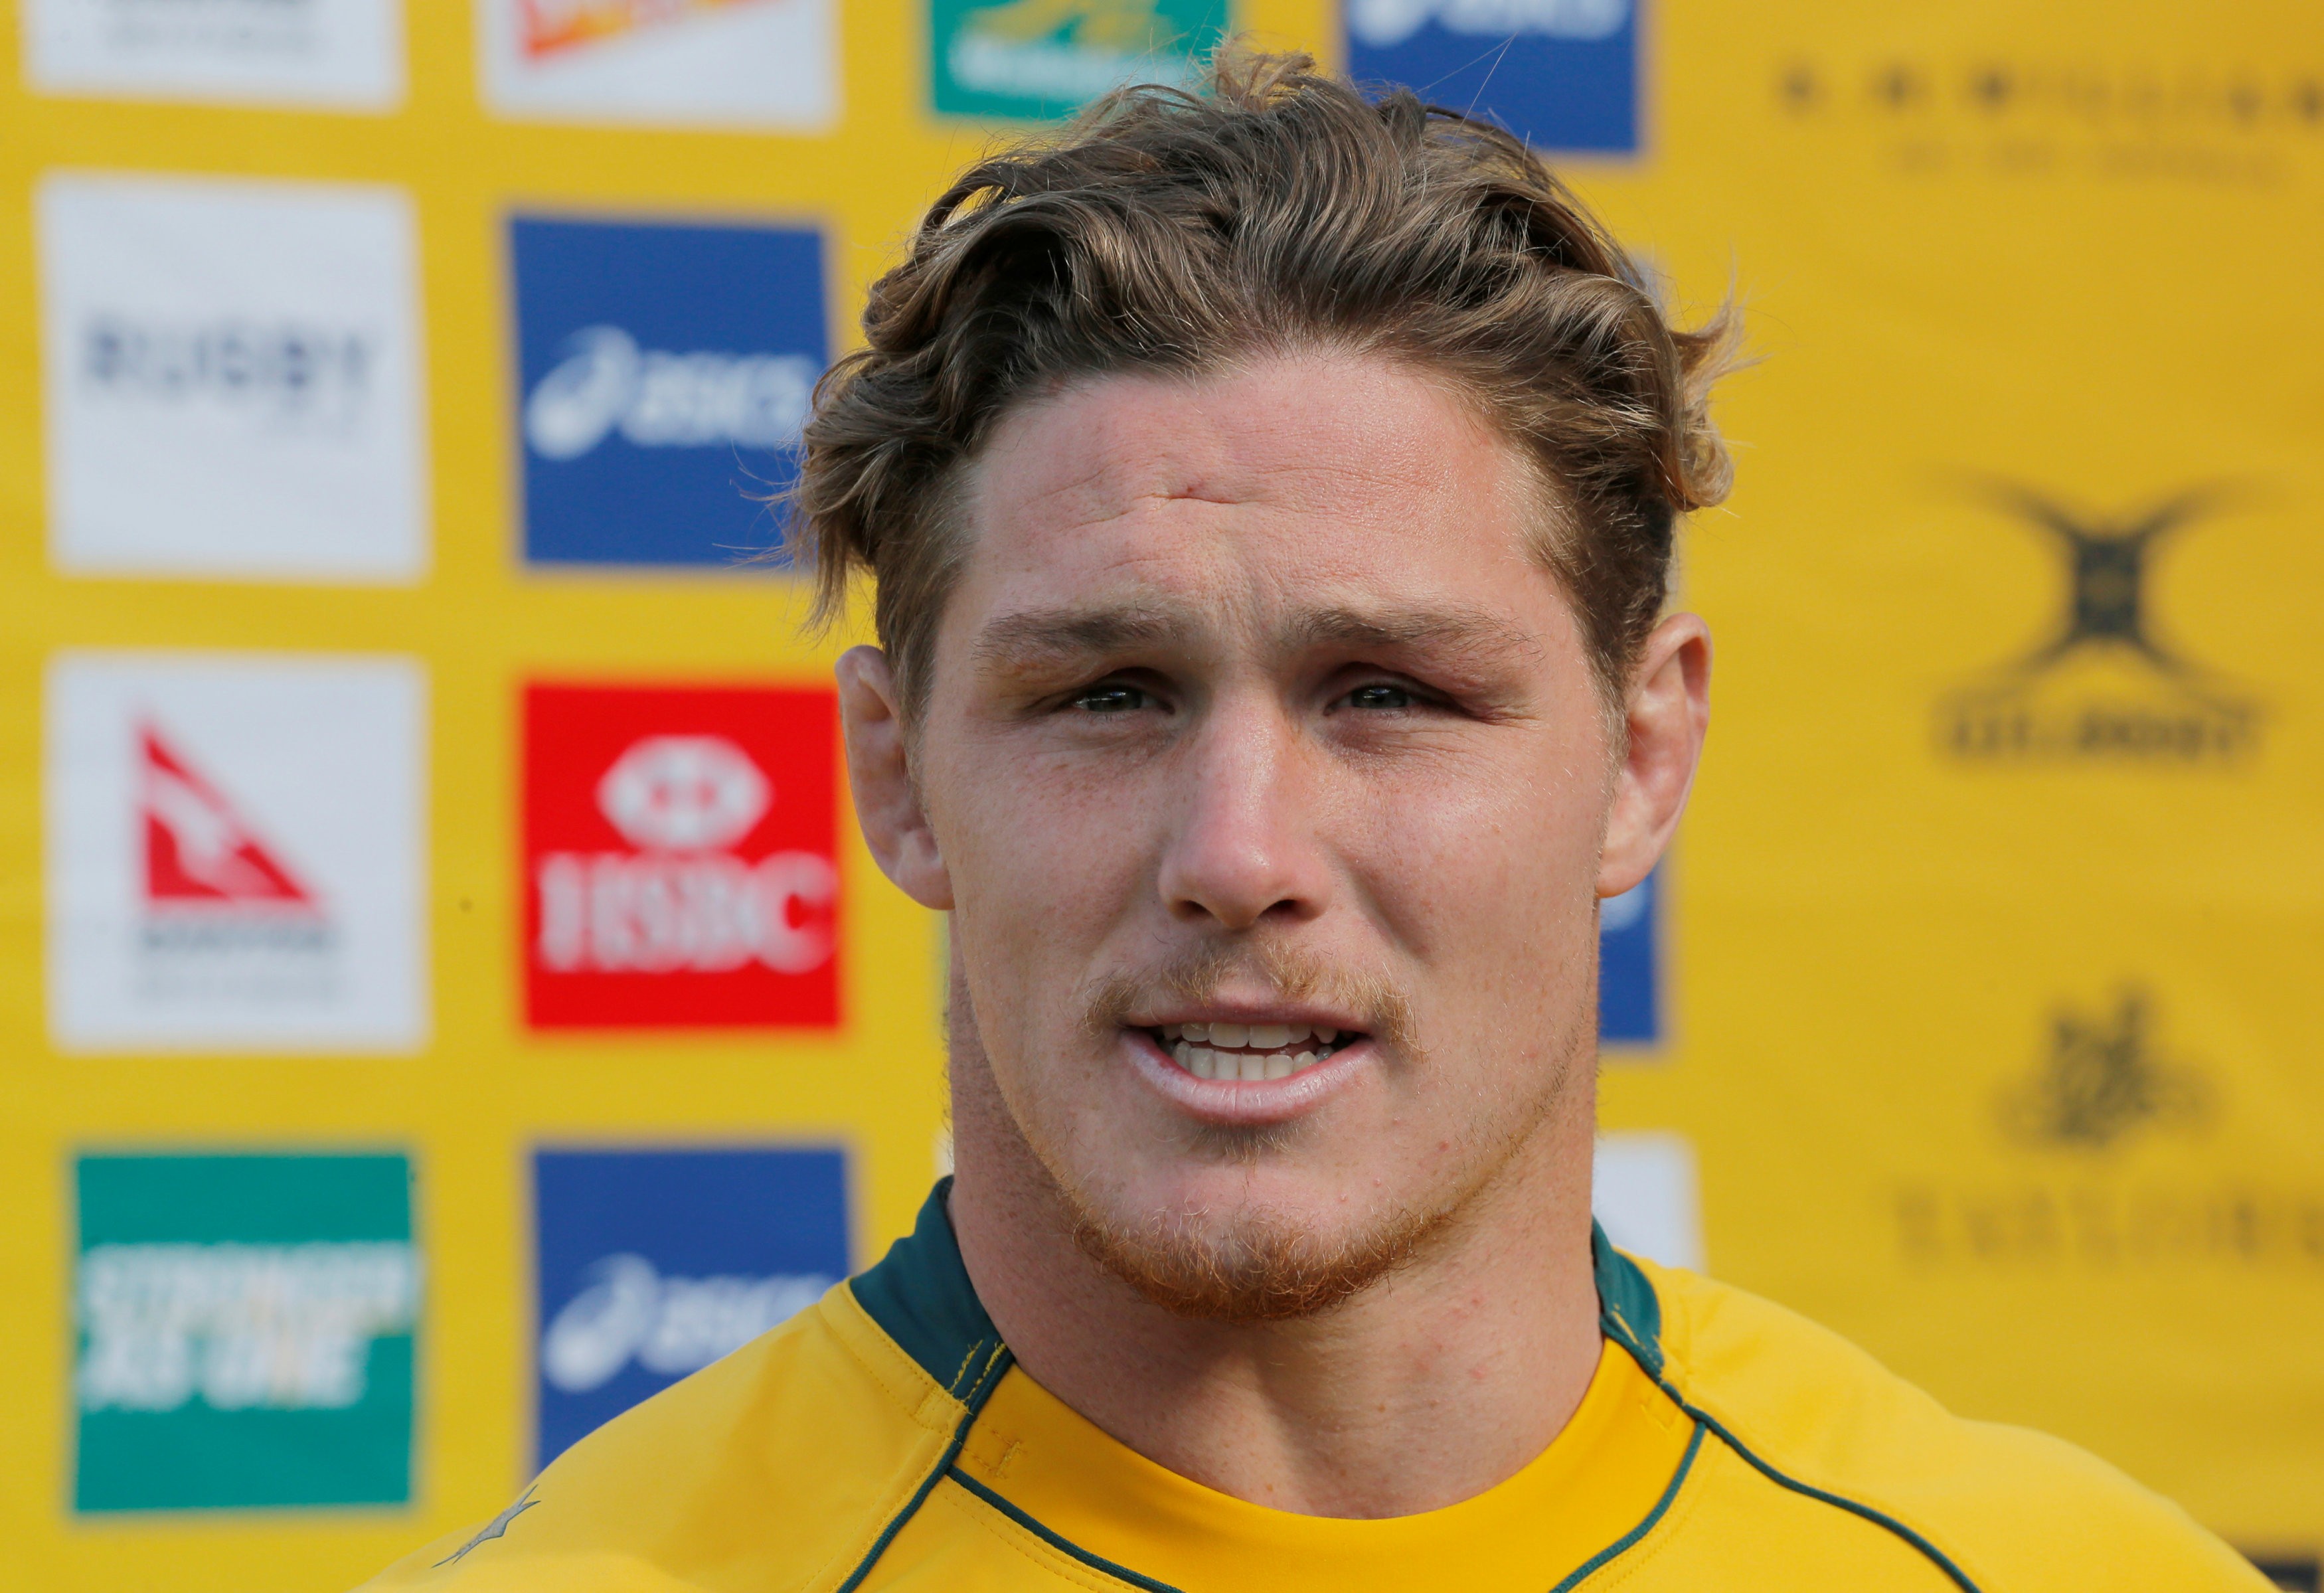 Michael Hooper is honoured to captain the Wallabies. Photo: Reuters